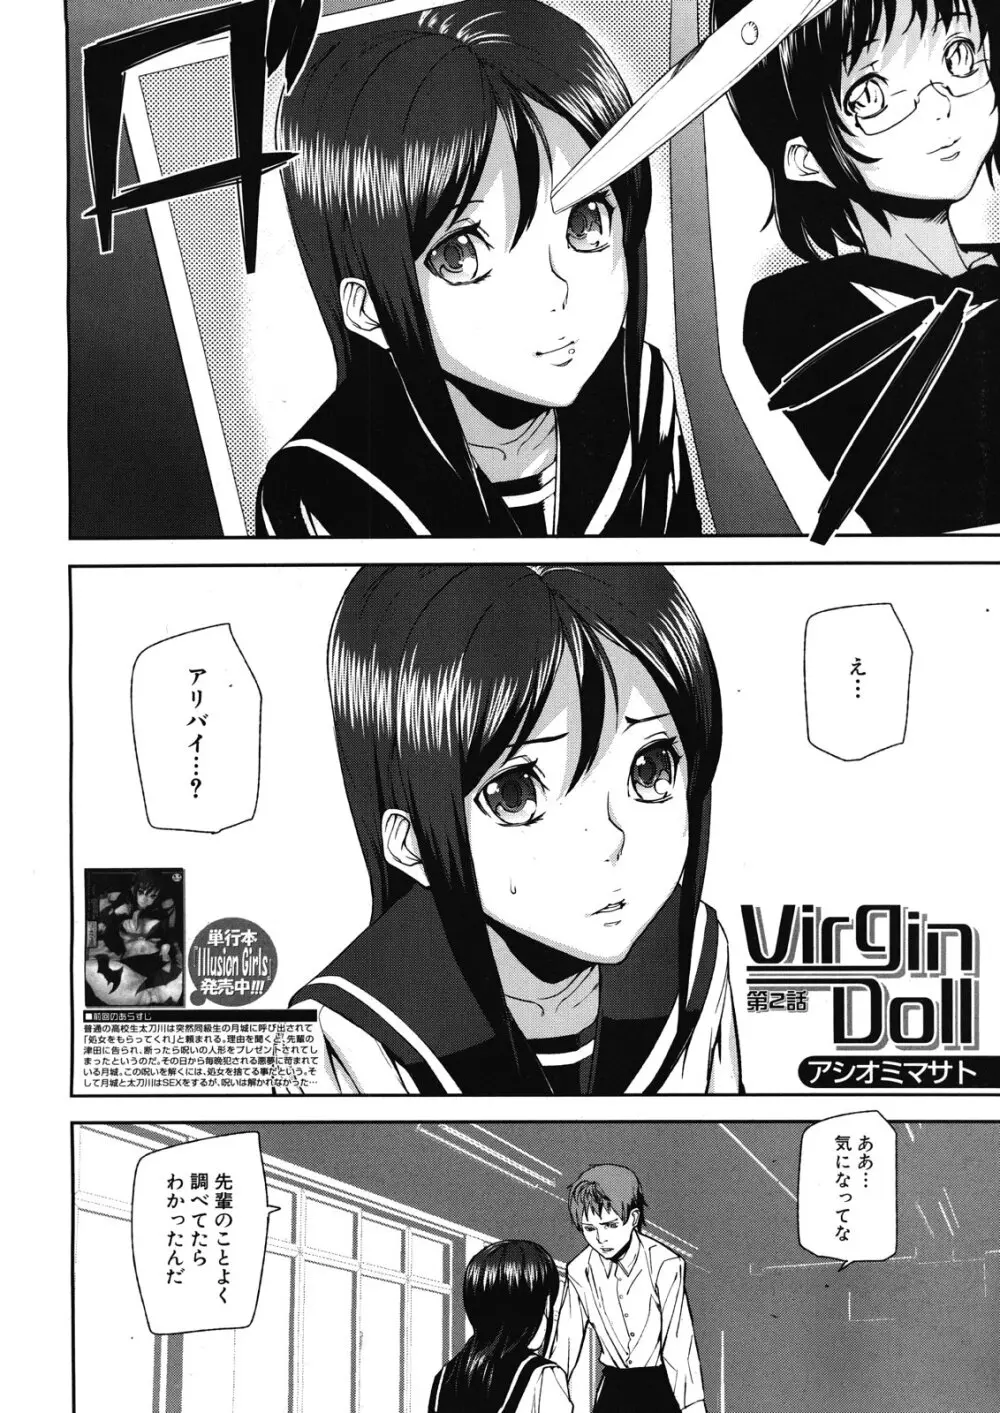 Virgin Doll 第1-3章 Page.34